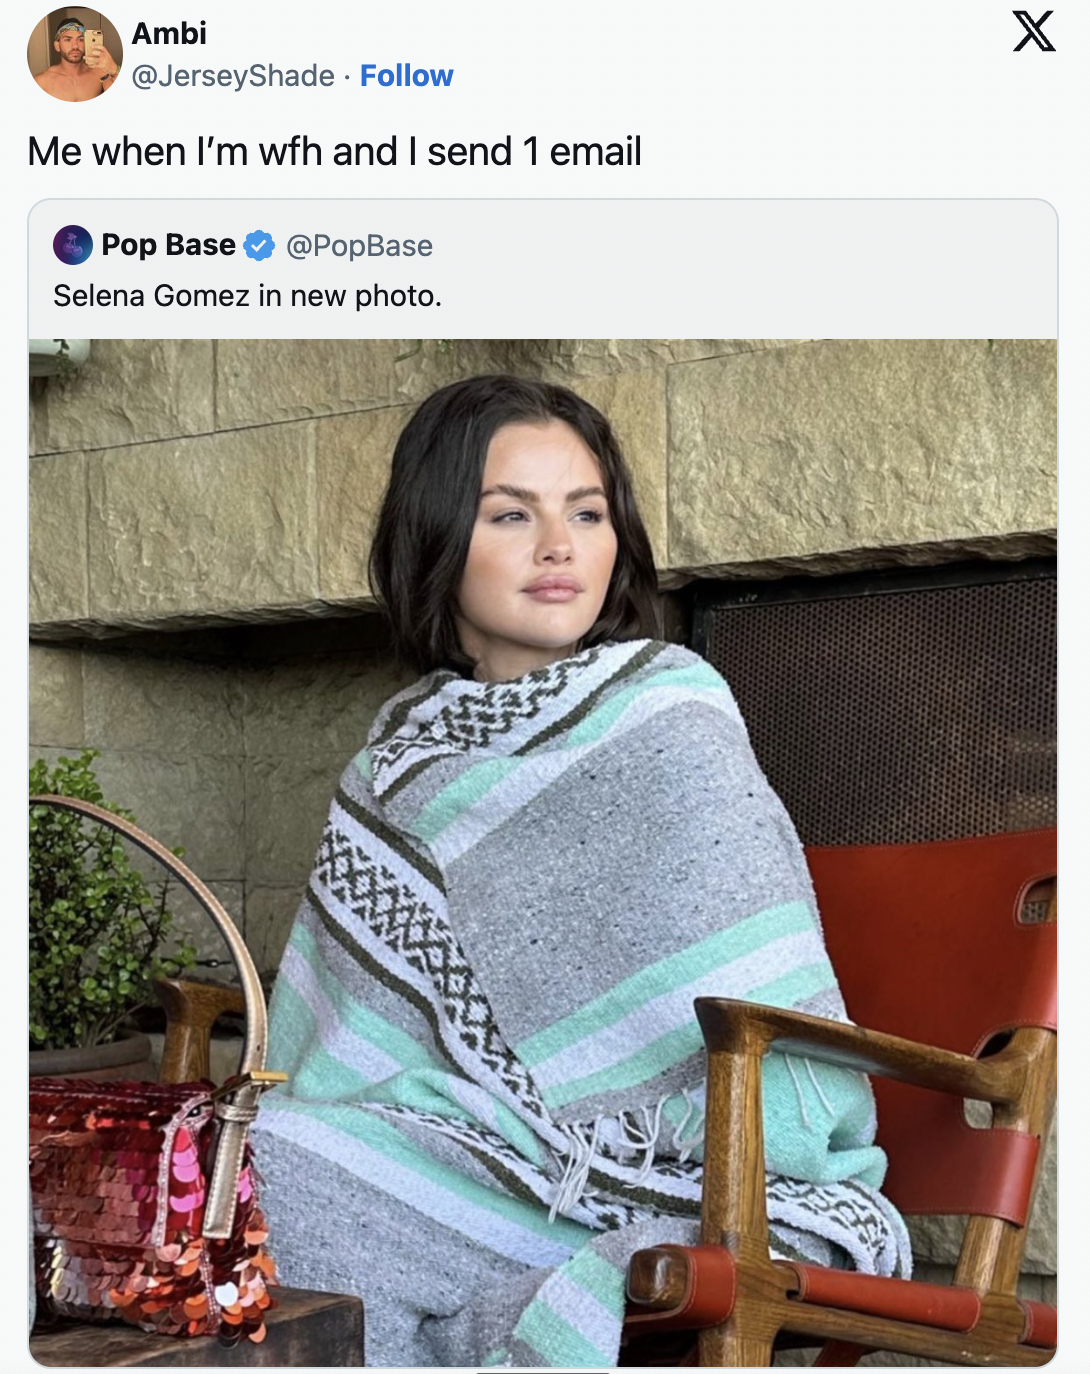 selena gomez in a blanket - stole - Ambi . Me when I'm wfh and I send 1 email Pop Base Selena Gomez in new photo. X